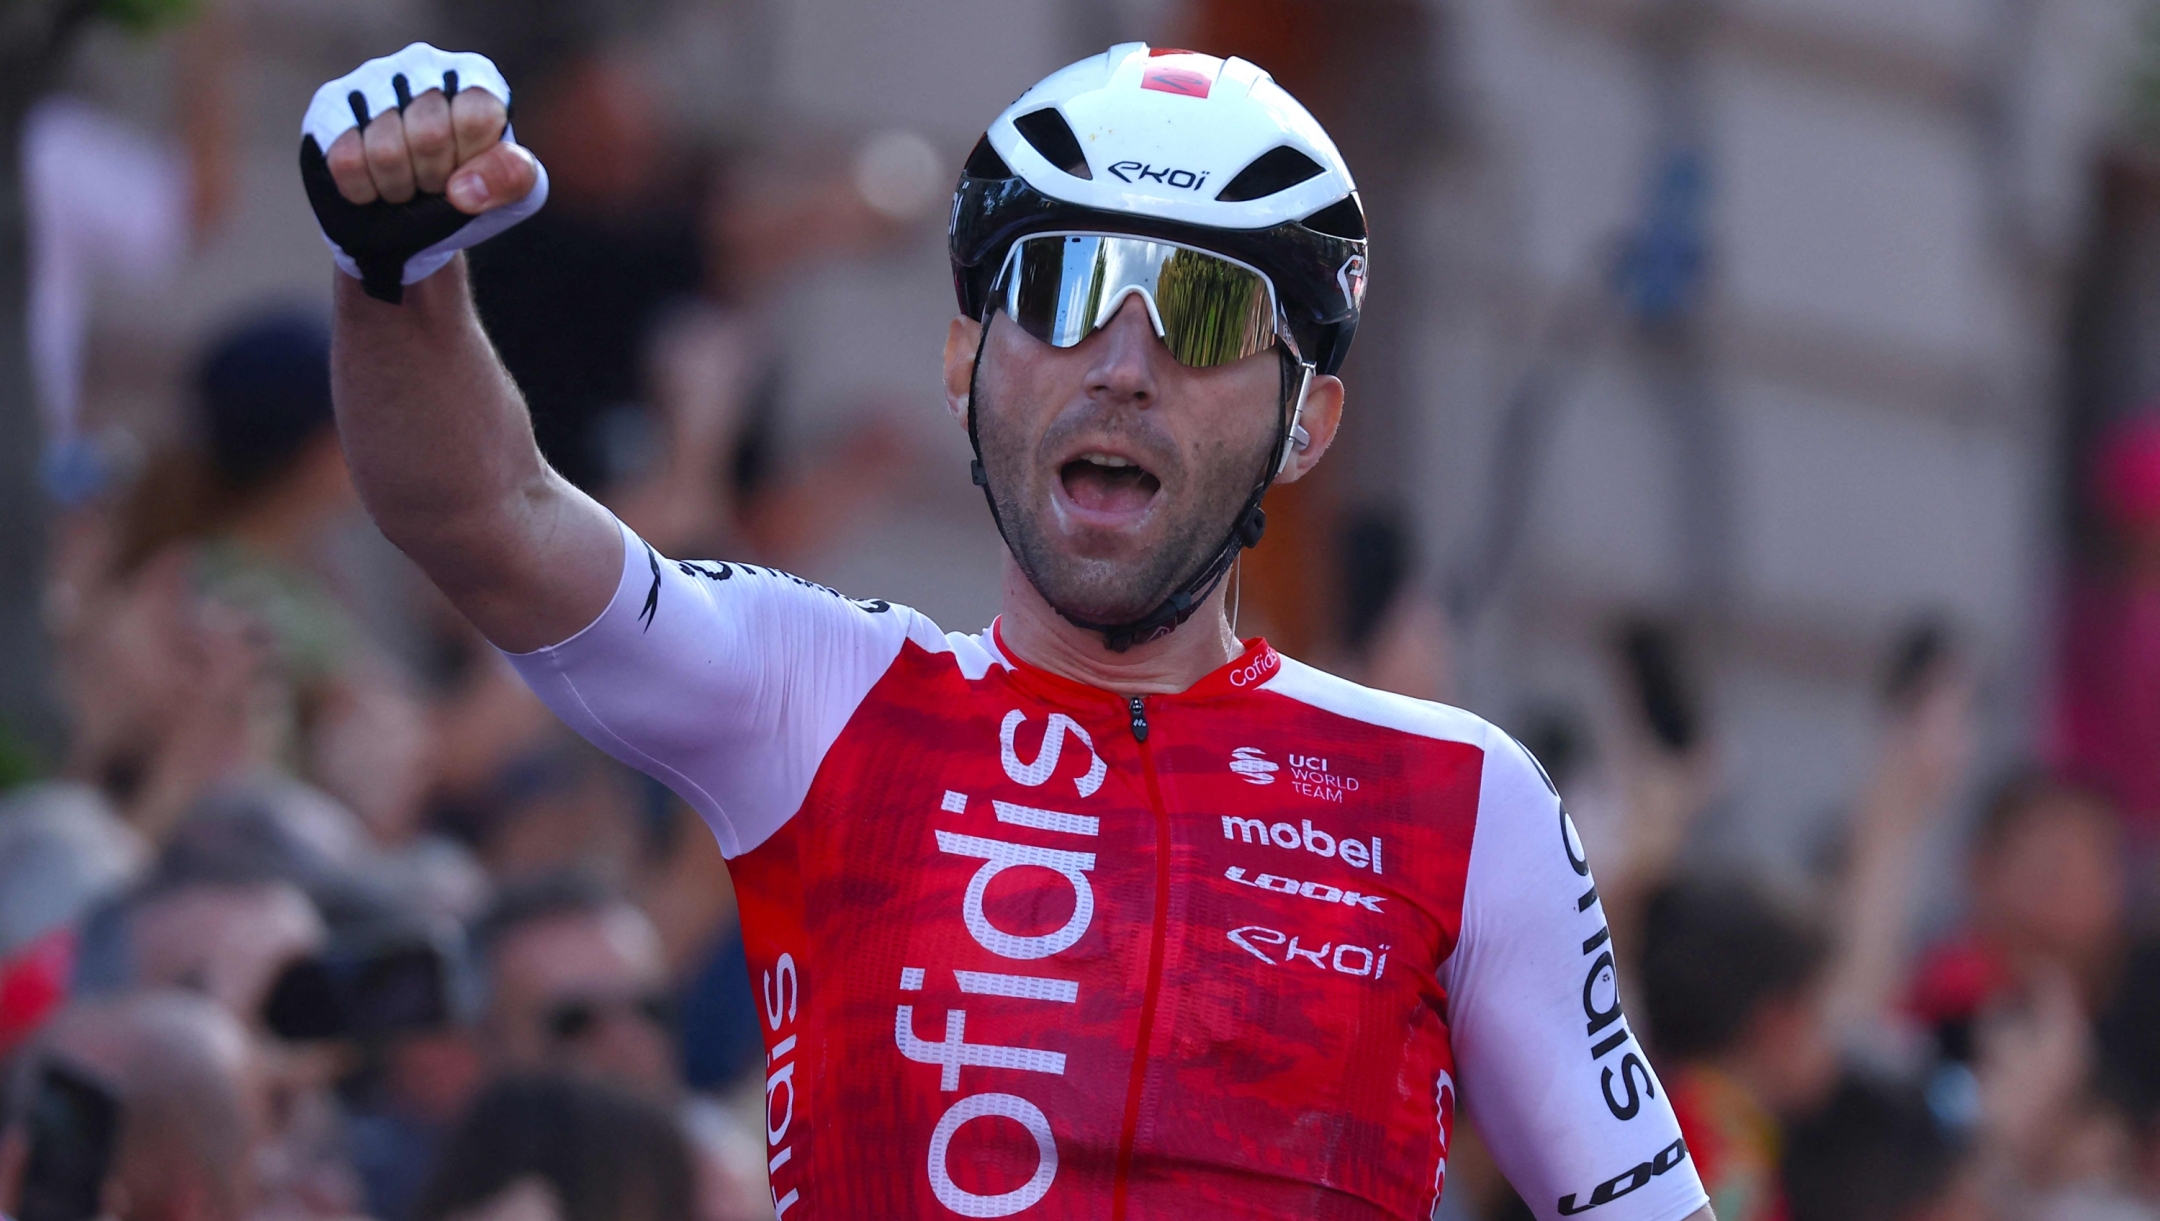 TOPSHOT - Team Cofidis' French rider Benjamin Thomas celebrates as he crosses the finish line to win the 5th stage of the 107th Giro d'Italia cycling race, 178 km between Genova and Lucca, on May 8, 2024 in Lucca. Thomas won ahead of Team EF Education's Danish rider Michael Valgren, second, and Team Polti-Kometa's Italian rider Andrea Pietrobon, third. (Photo by Luca Bettini / AFP)